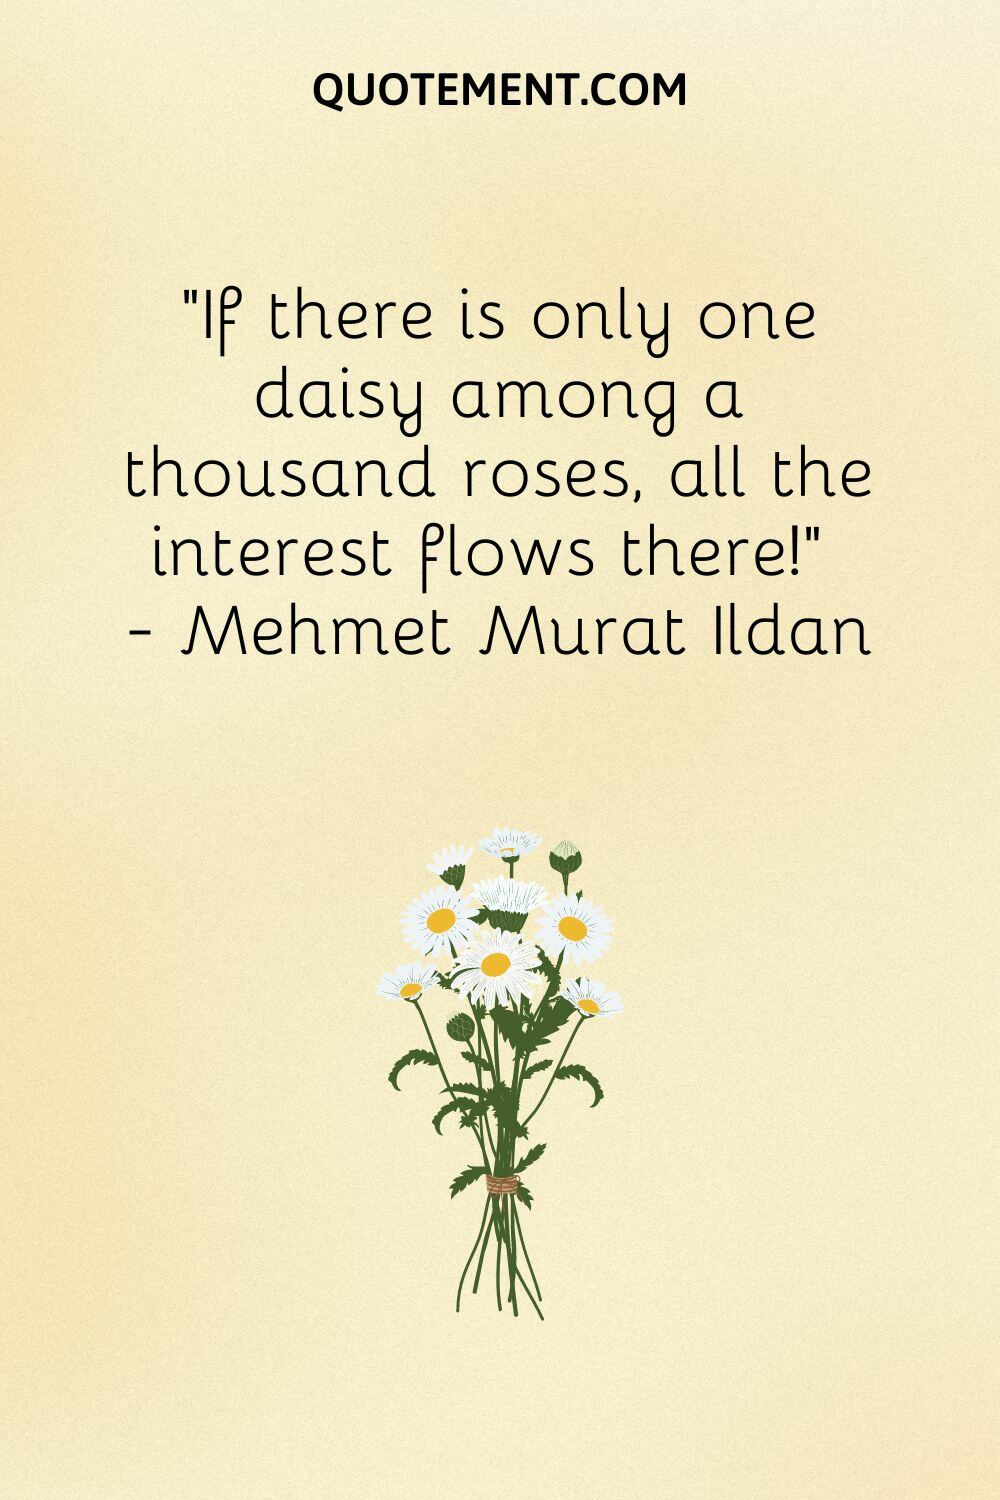 If there is only one daisy among a thousand roses, all the interest flows there